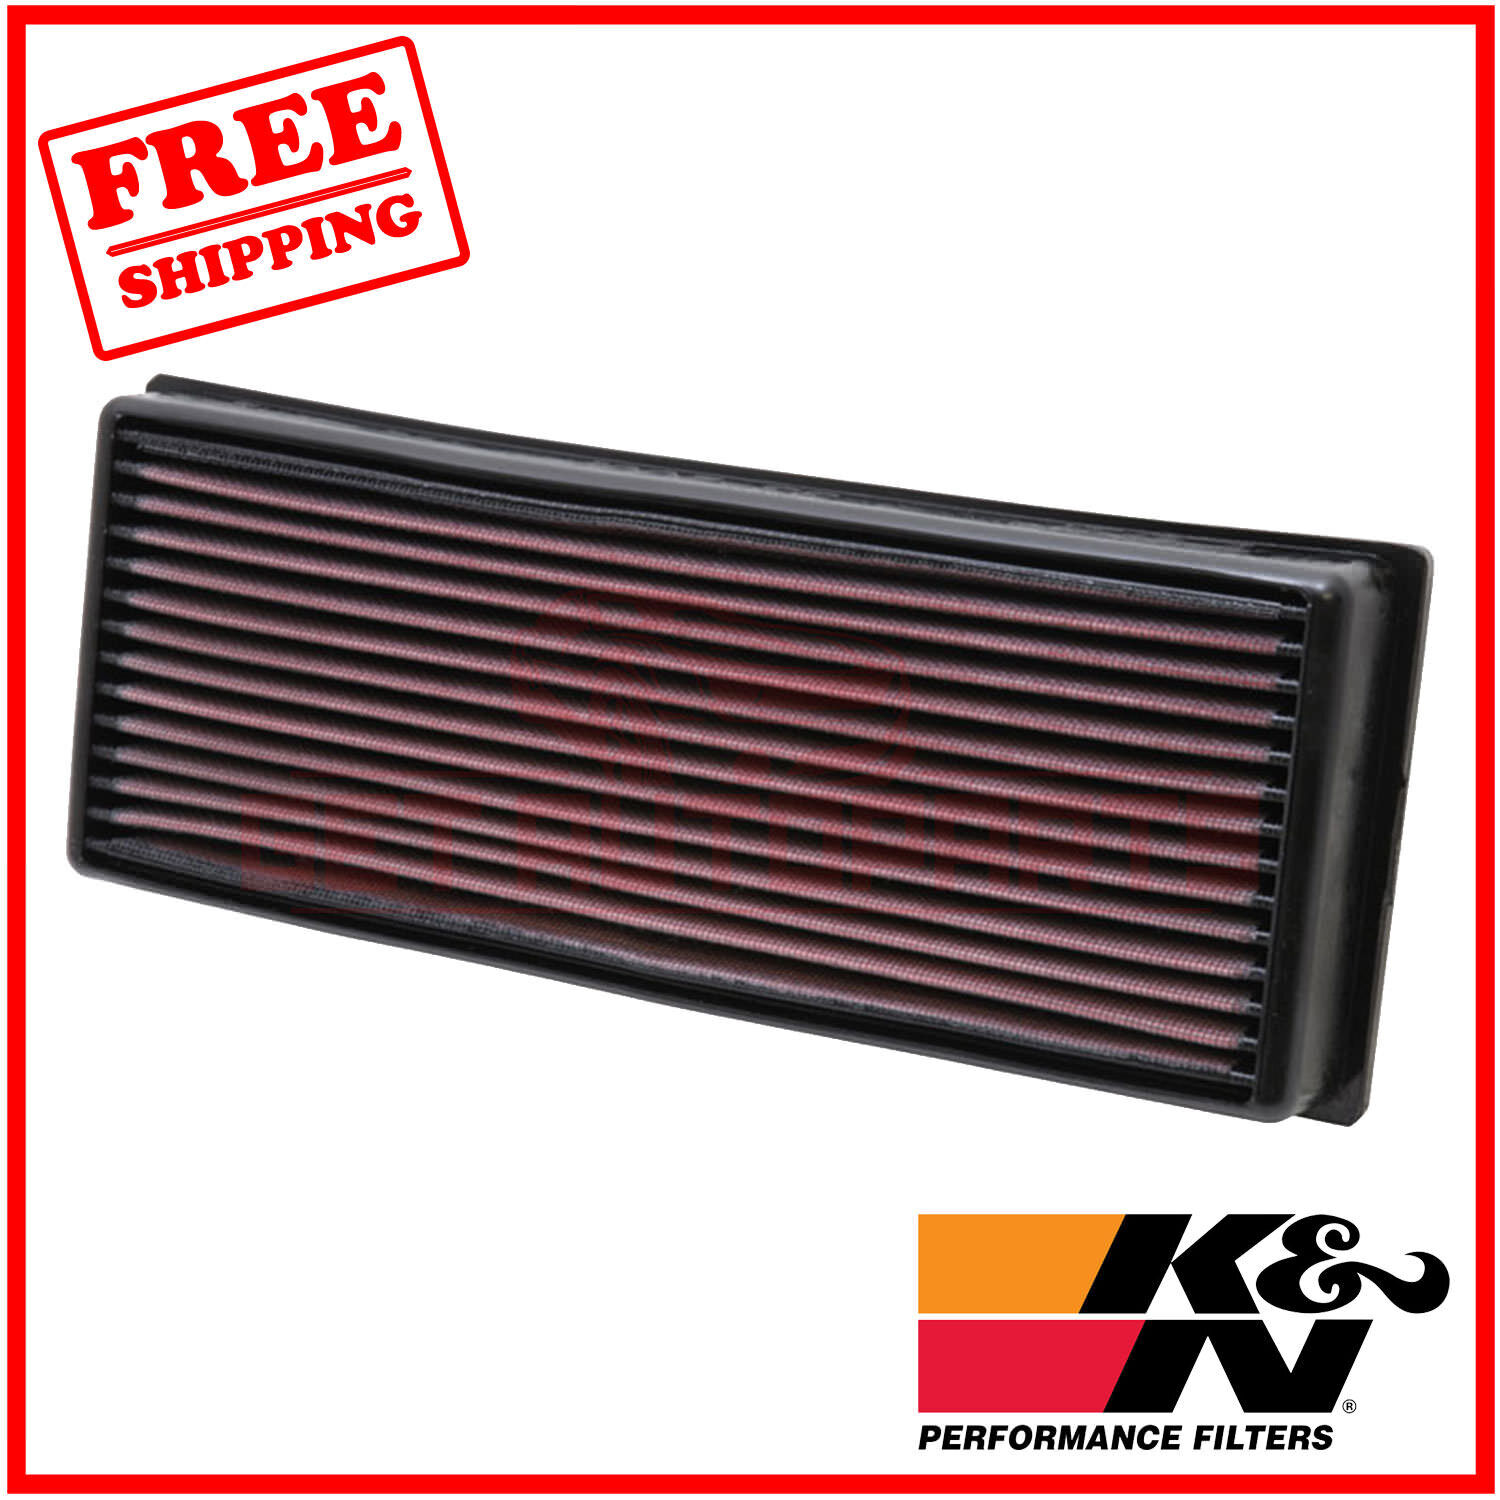 K&N Replacement Air Filter for Eagle Premier 1988-1992